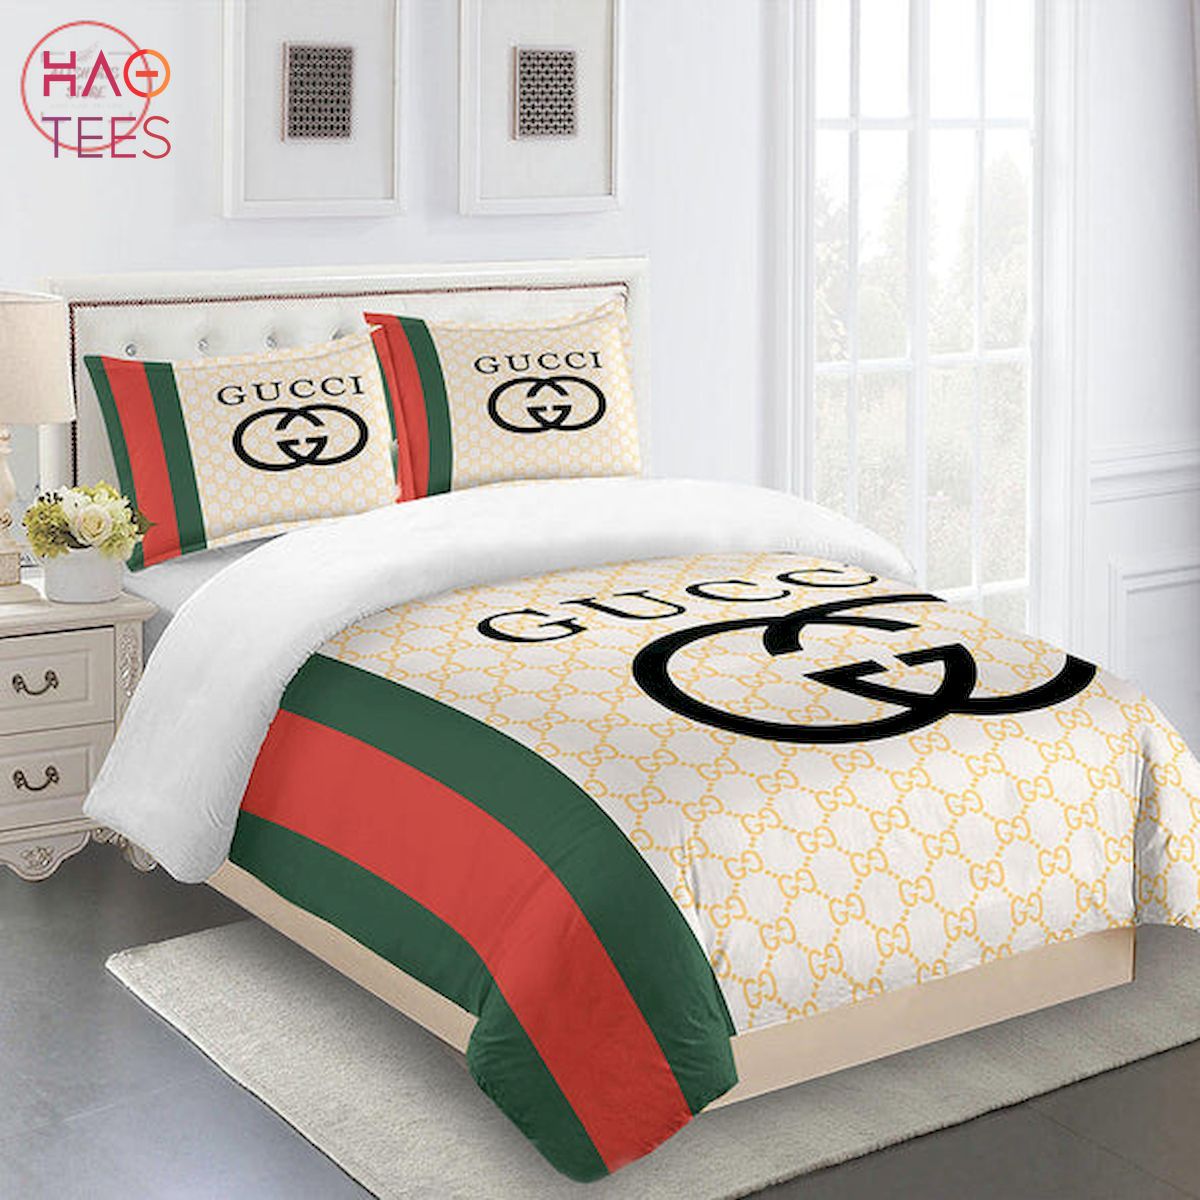 Gucci bedding set green red beig Luxury bed sheets